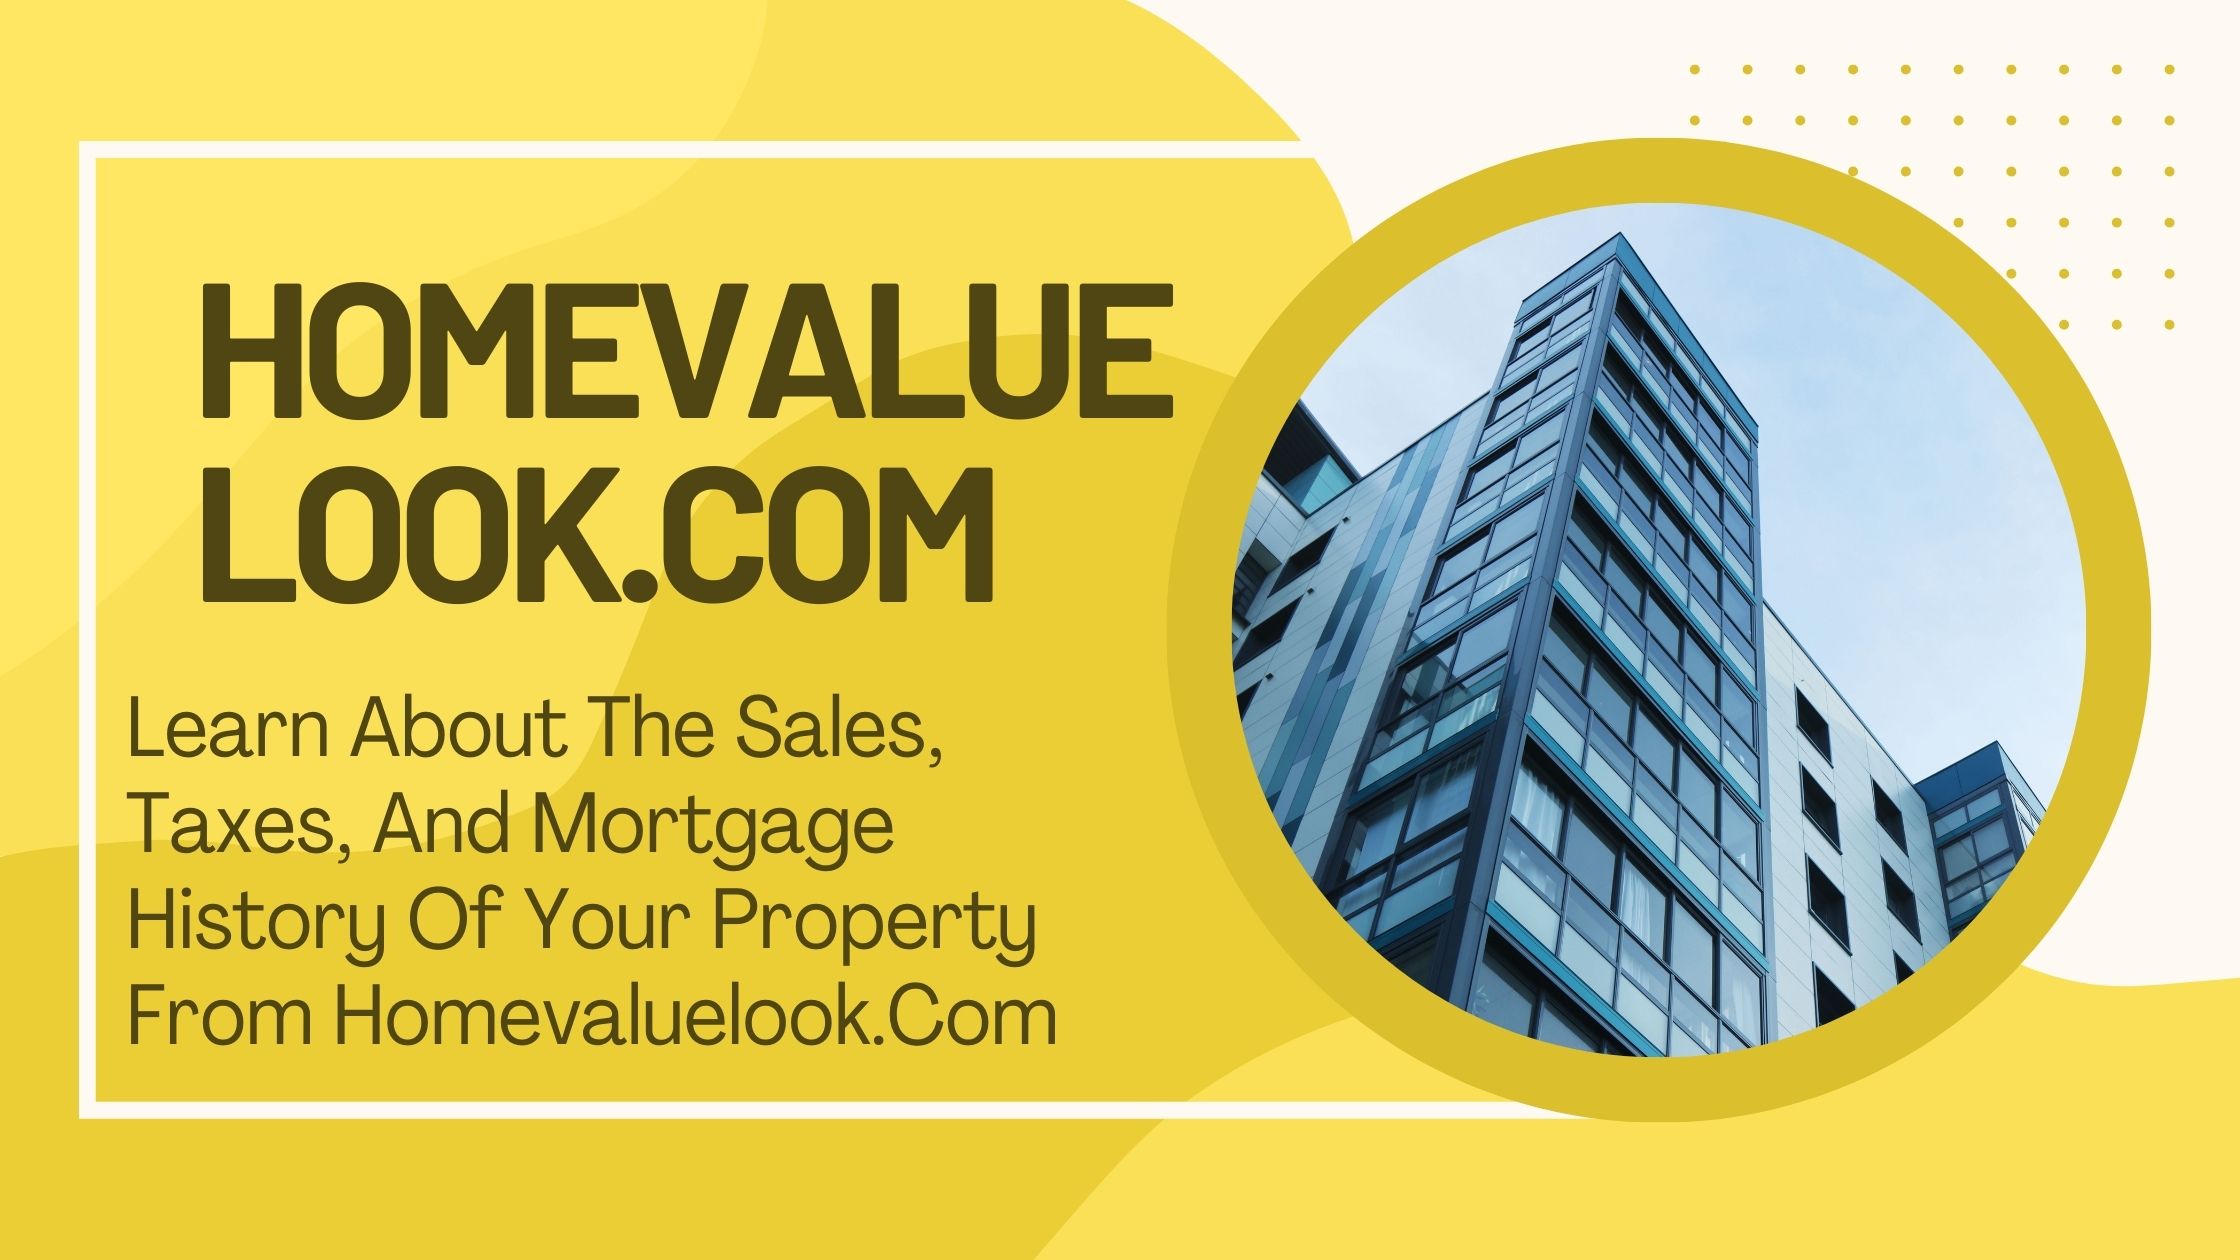 Learn About The Sales, Taxes, And Mortgage History Of Your Property From Homevaluelook.Com – HomeValueLook.com